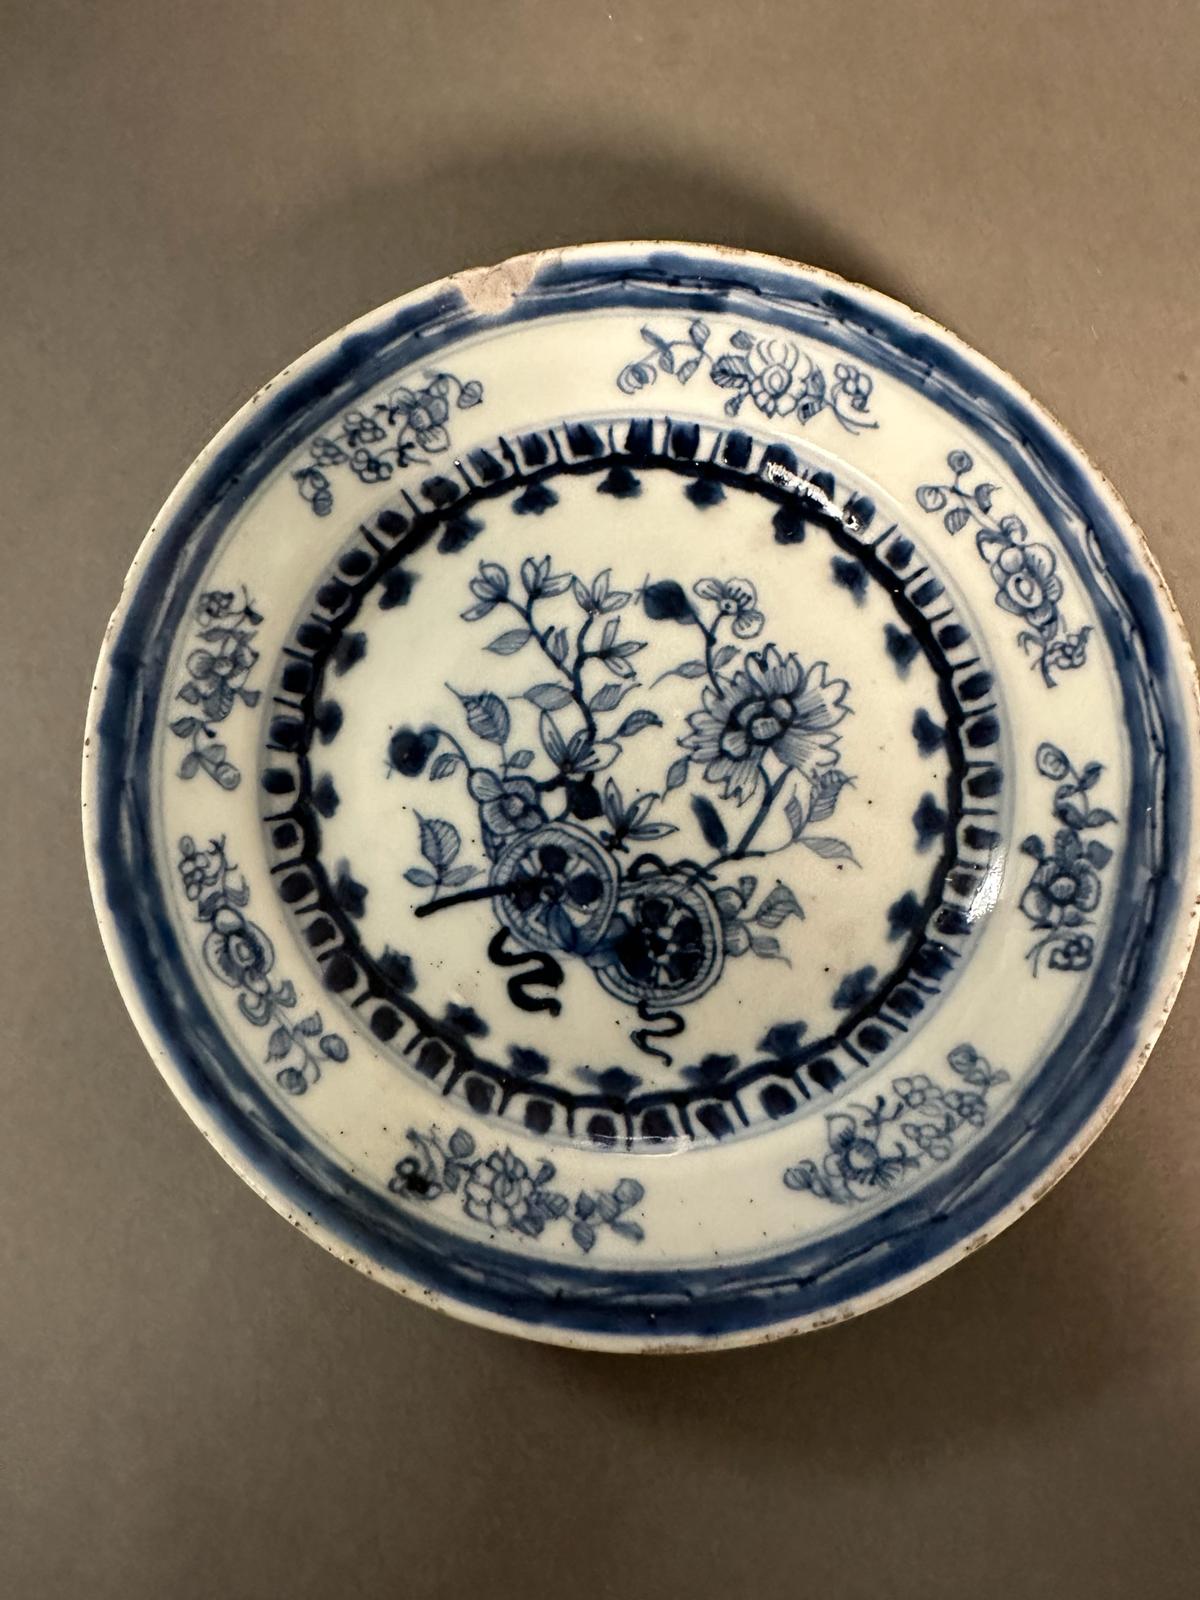 A selection of Chinese blue and white ceramic to include a plate, side plates and a small bowl - Image 10 of 12